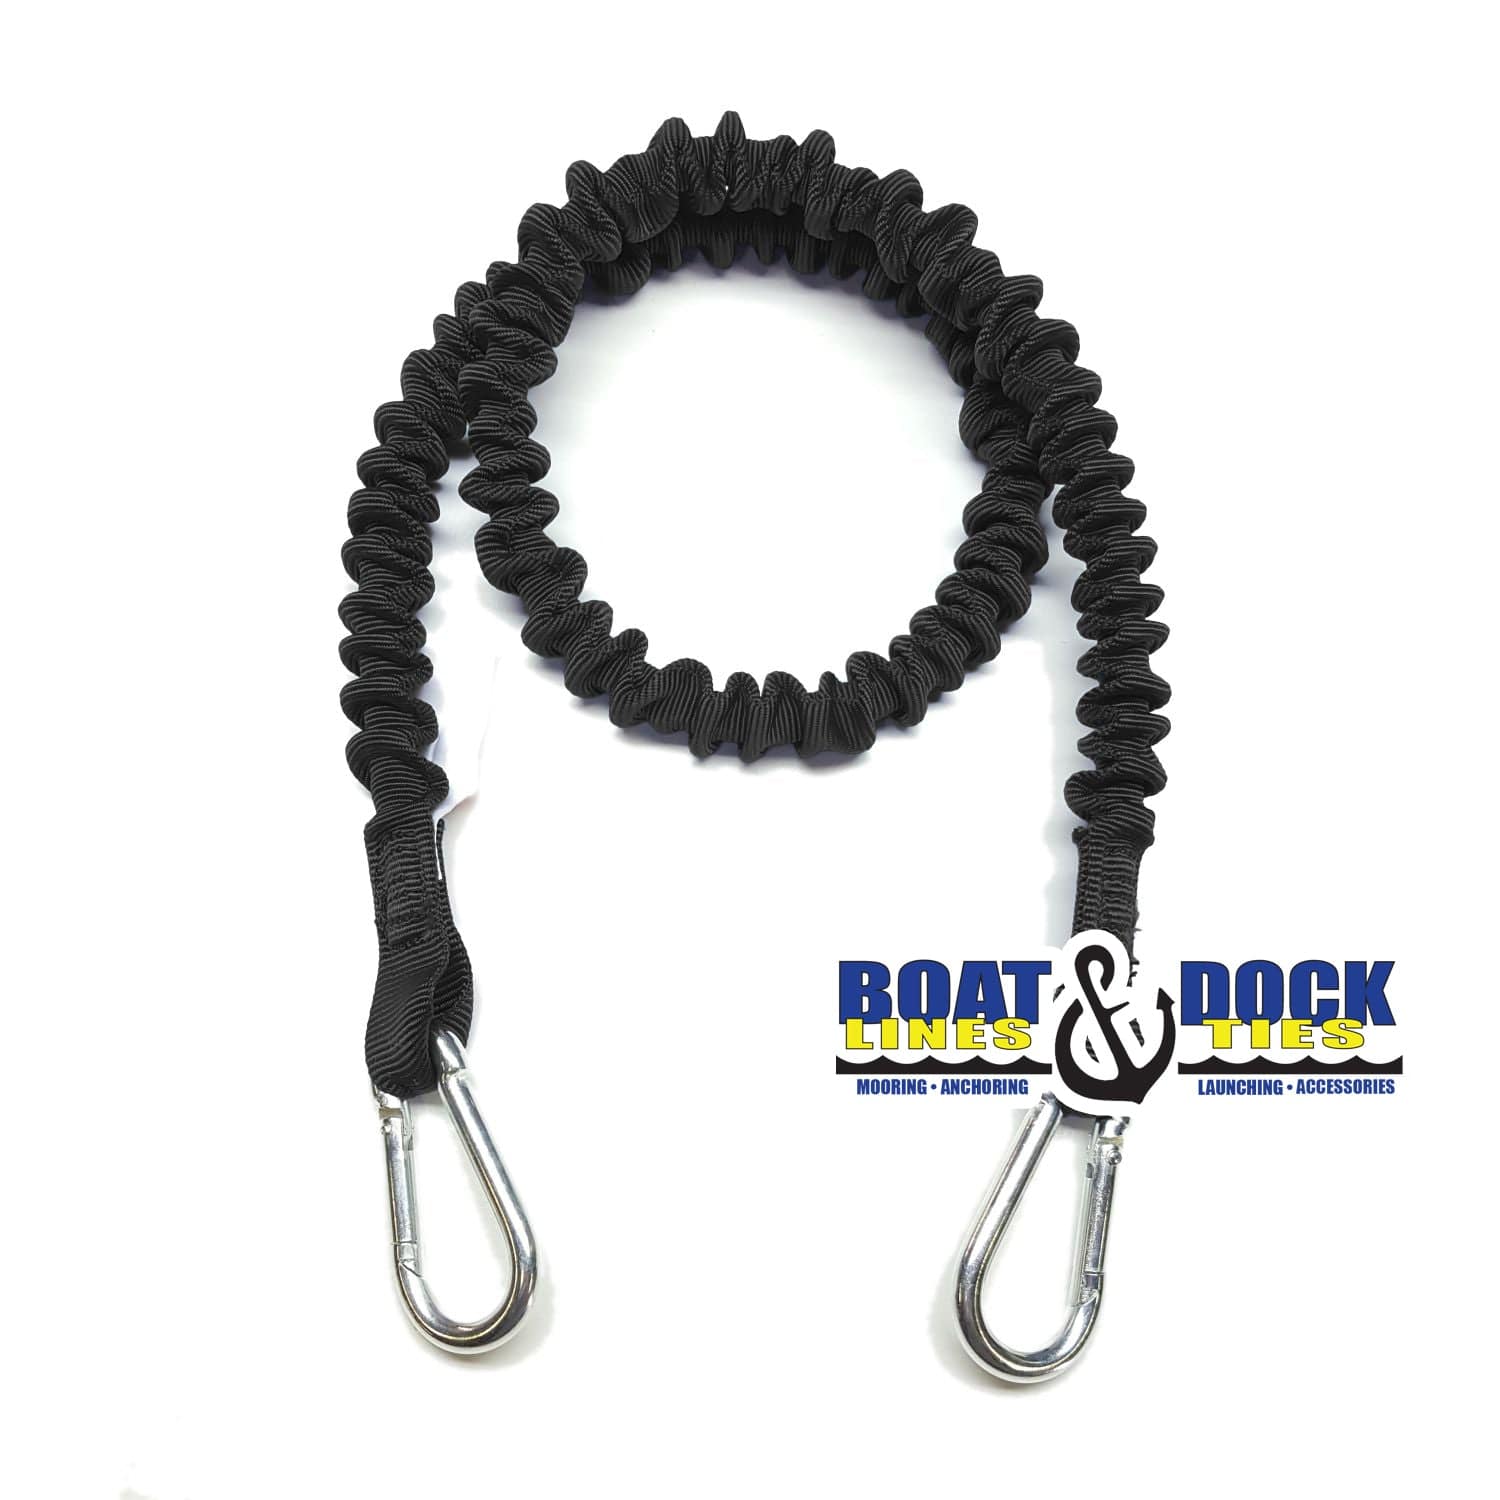 Boat Dock Tie Bungee Cords, 2 Hooked Ends, UV Protected Bungee Cords - Set of 2 - Made in USA - Boat Lines & Dock Ties Boat Lines & Dock Ties 48" / Black